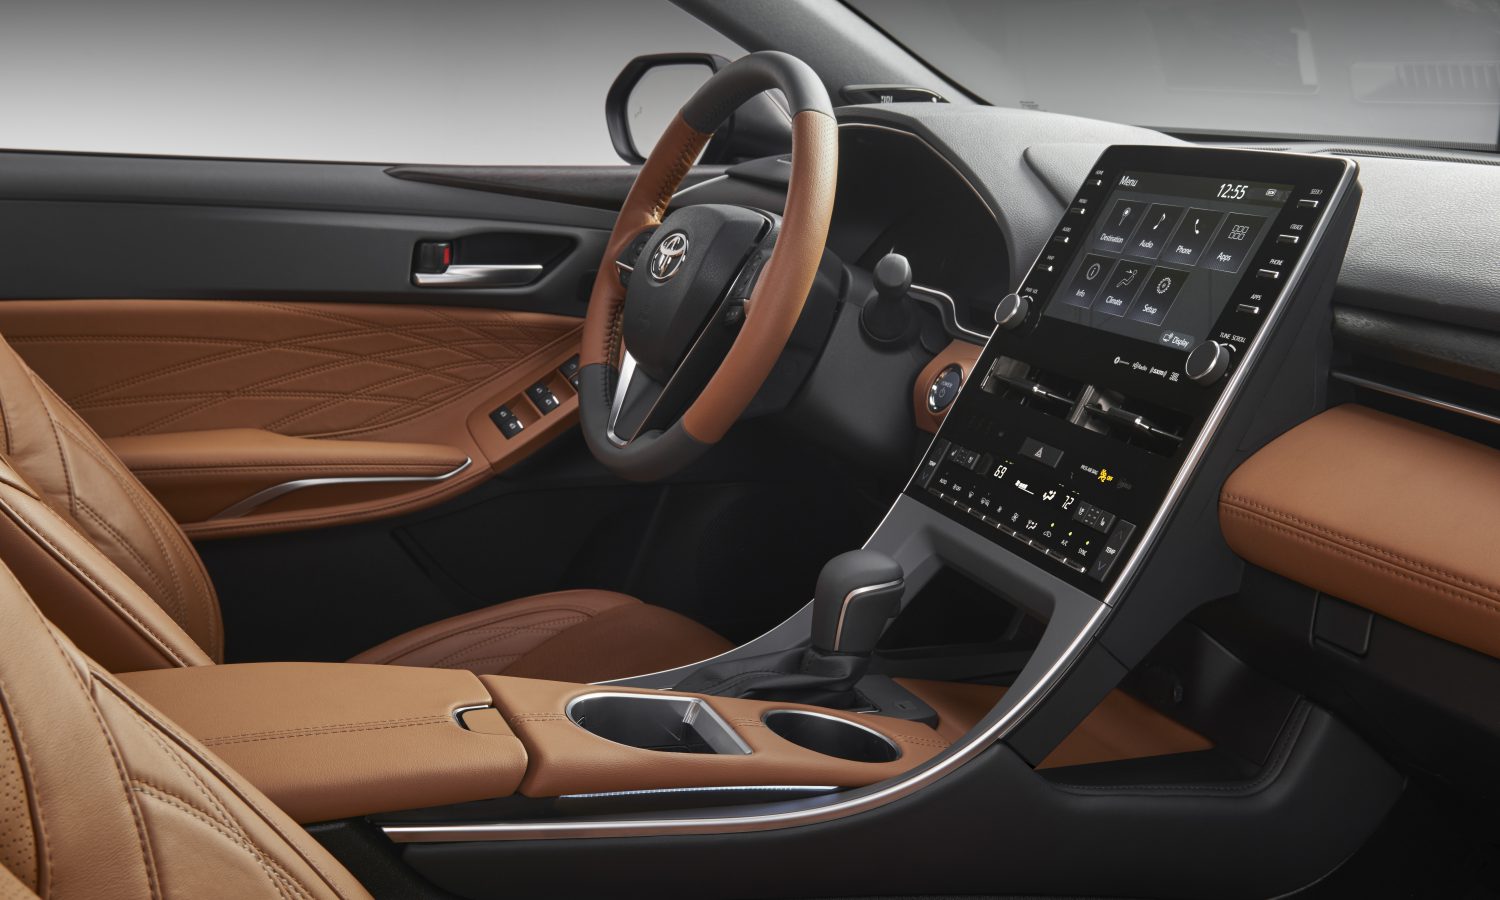 Interior shot of the top trim level of the 2019 Toyota Avalon, one of the most reliable used cars